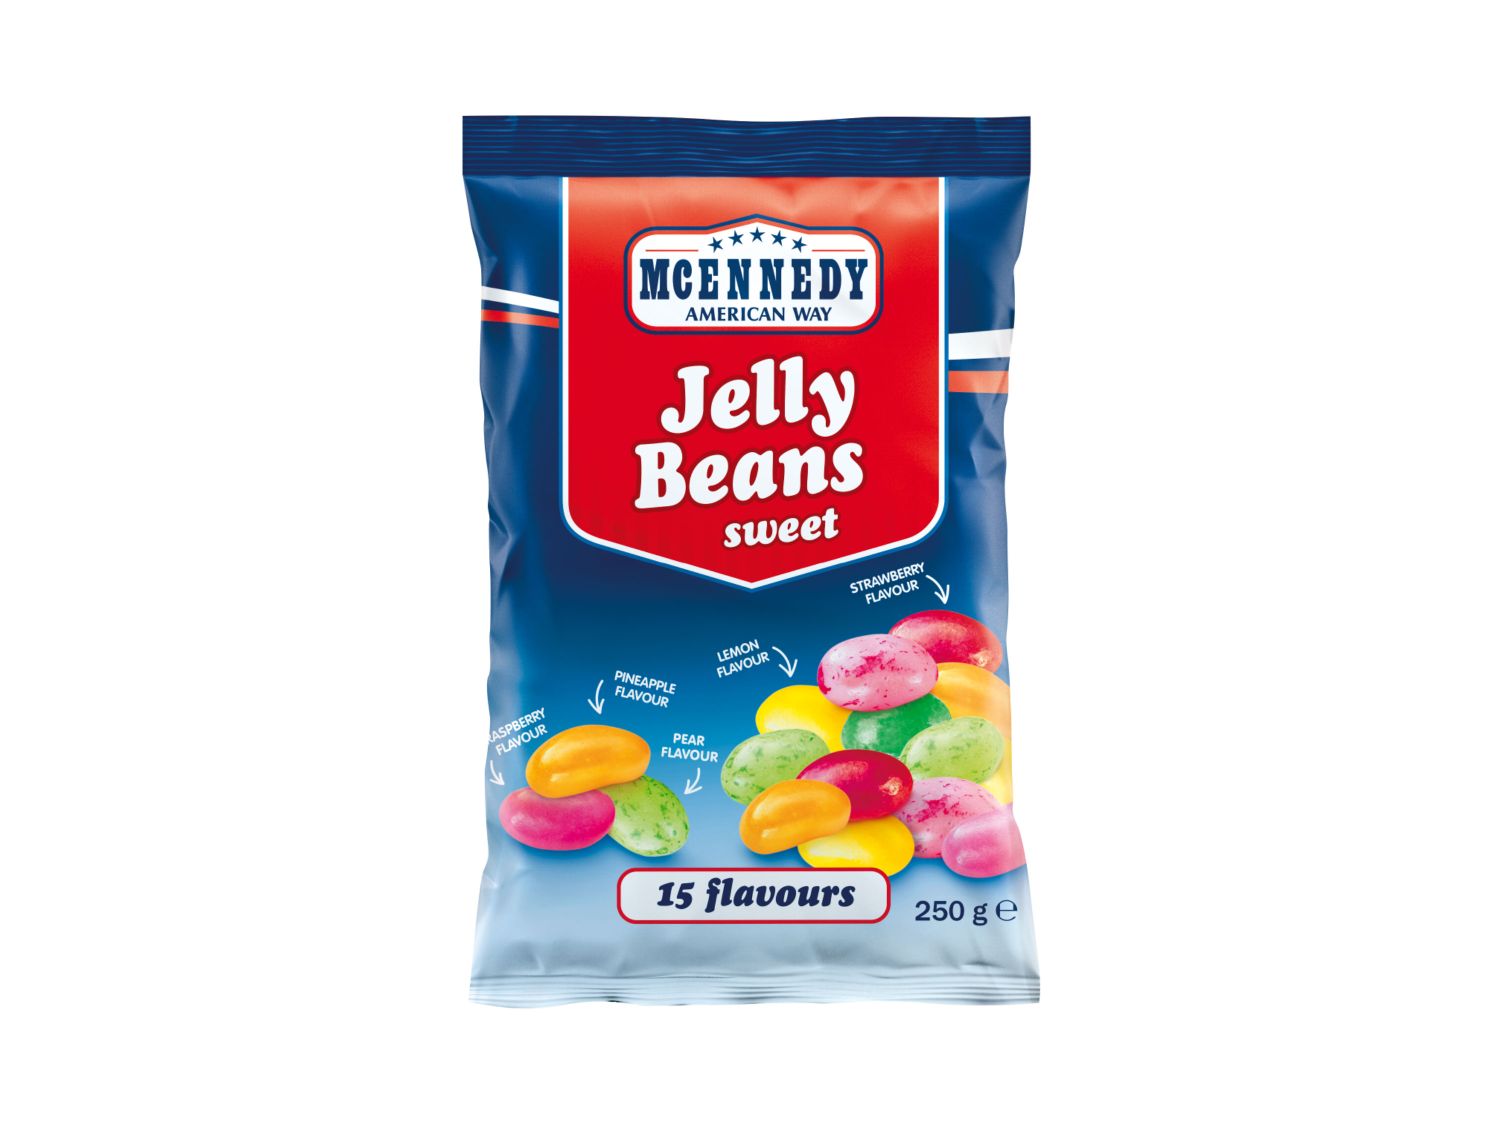 McEnnedy® Jelly Beans - at Lidl Portugal